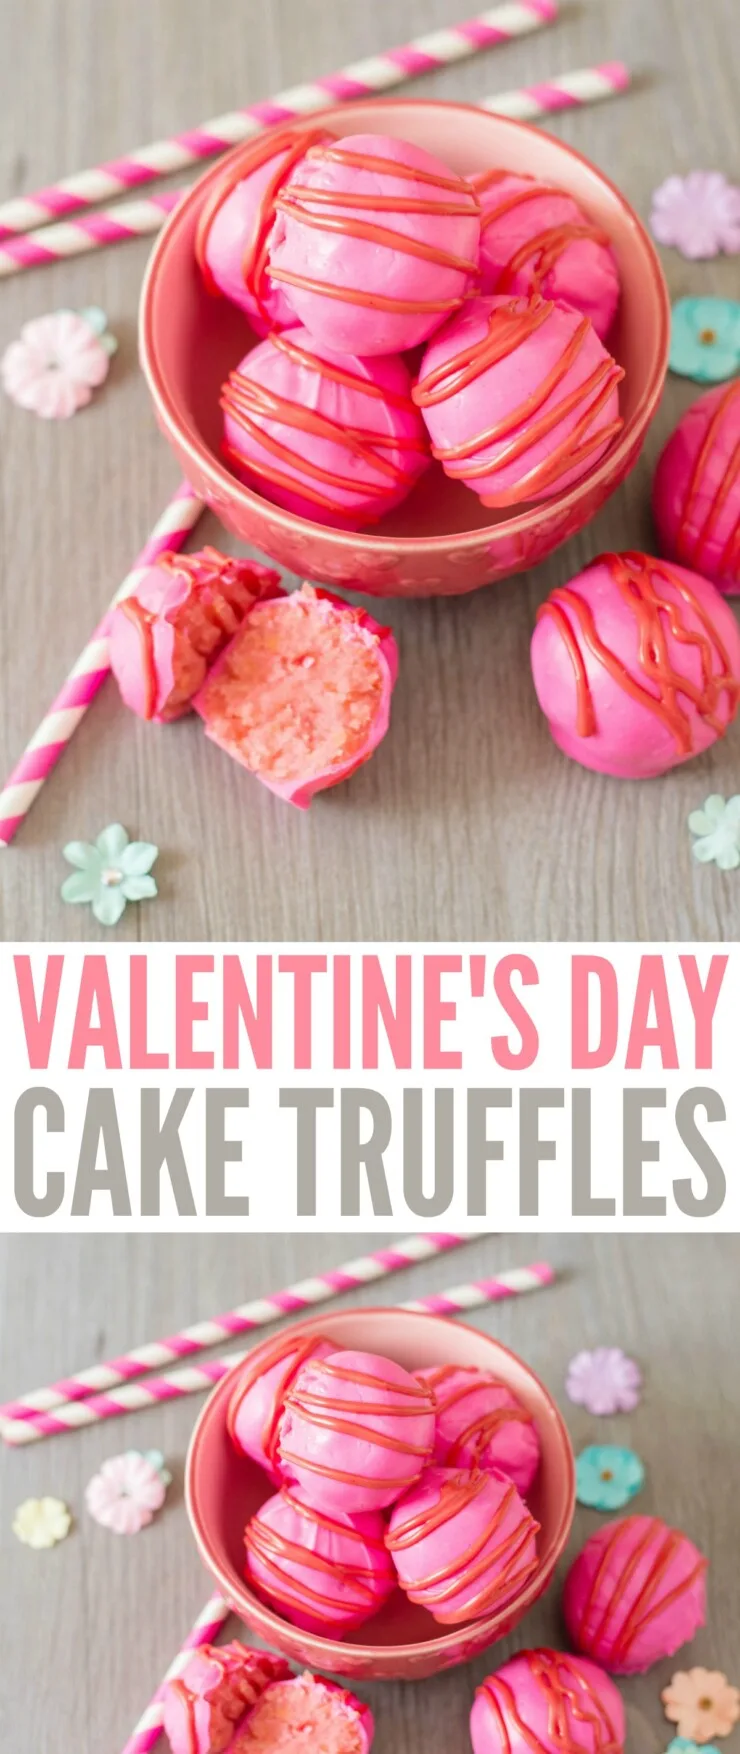 These Valentine's Day Cake Truffles are sure to impress everyone this Valentine’s Day! These little bites of creamy cake covered in chocolate are just so delicious. Valentine's Day Cake Balls are easy to make and perfectly festive.